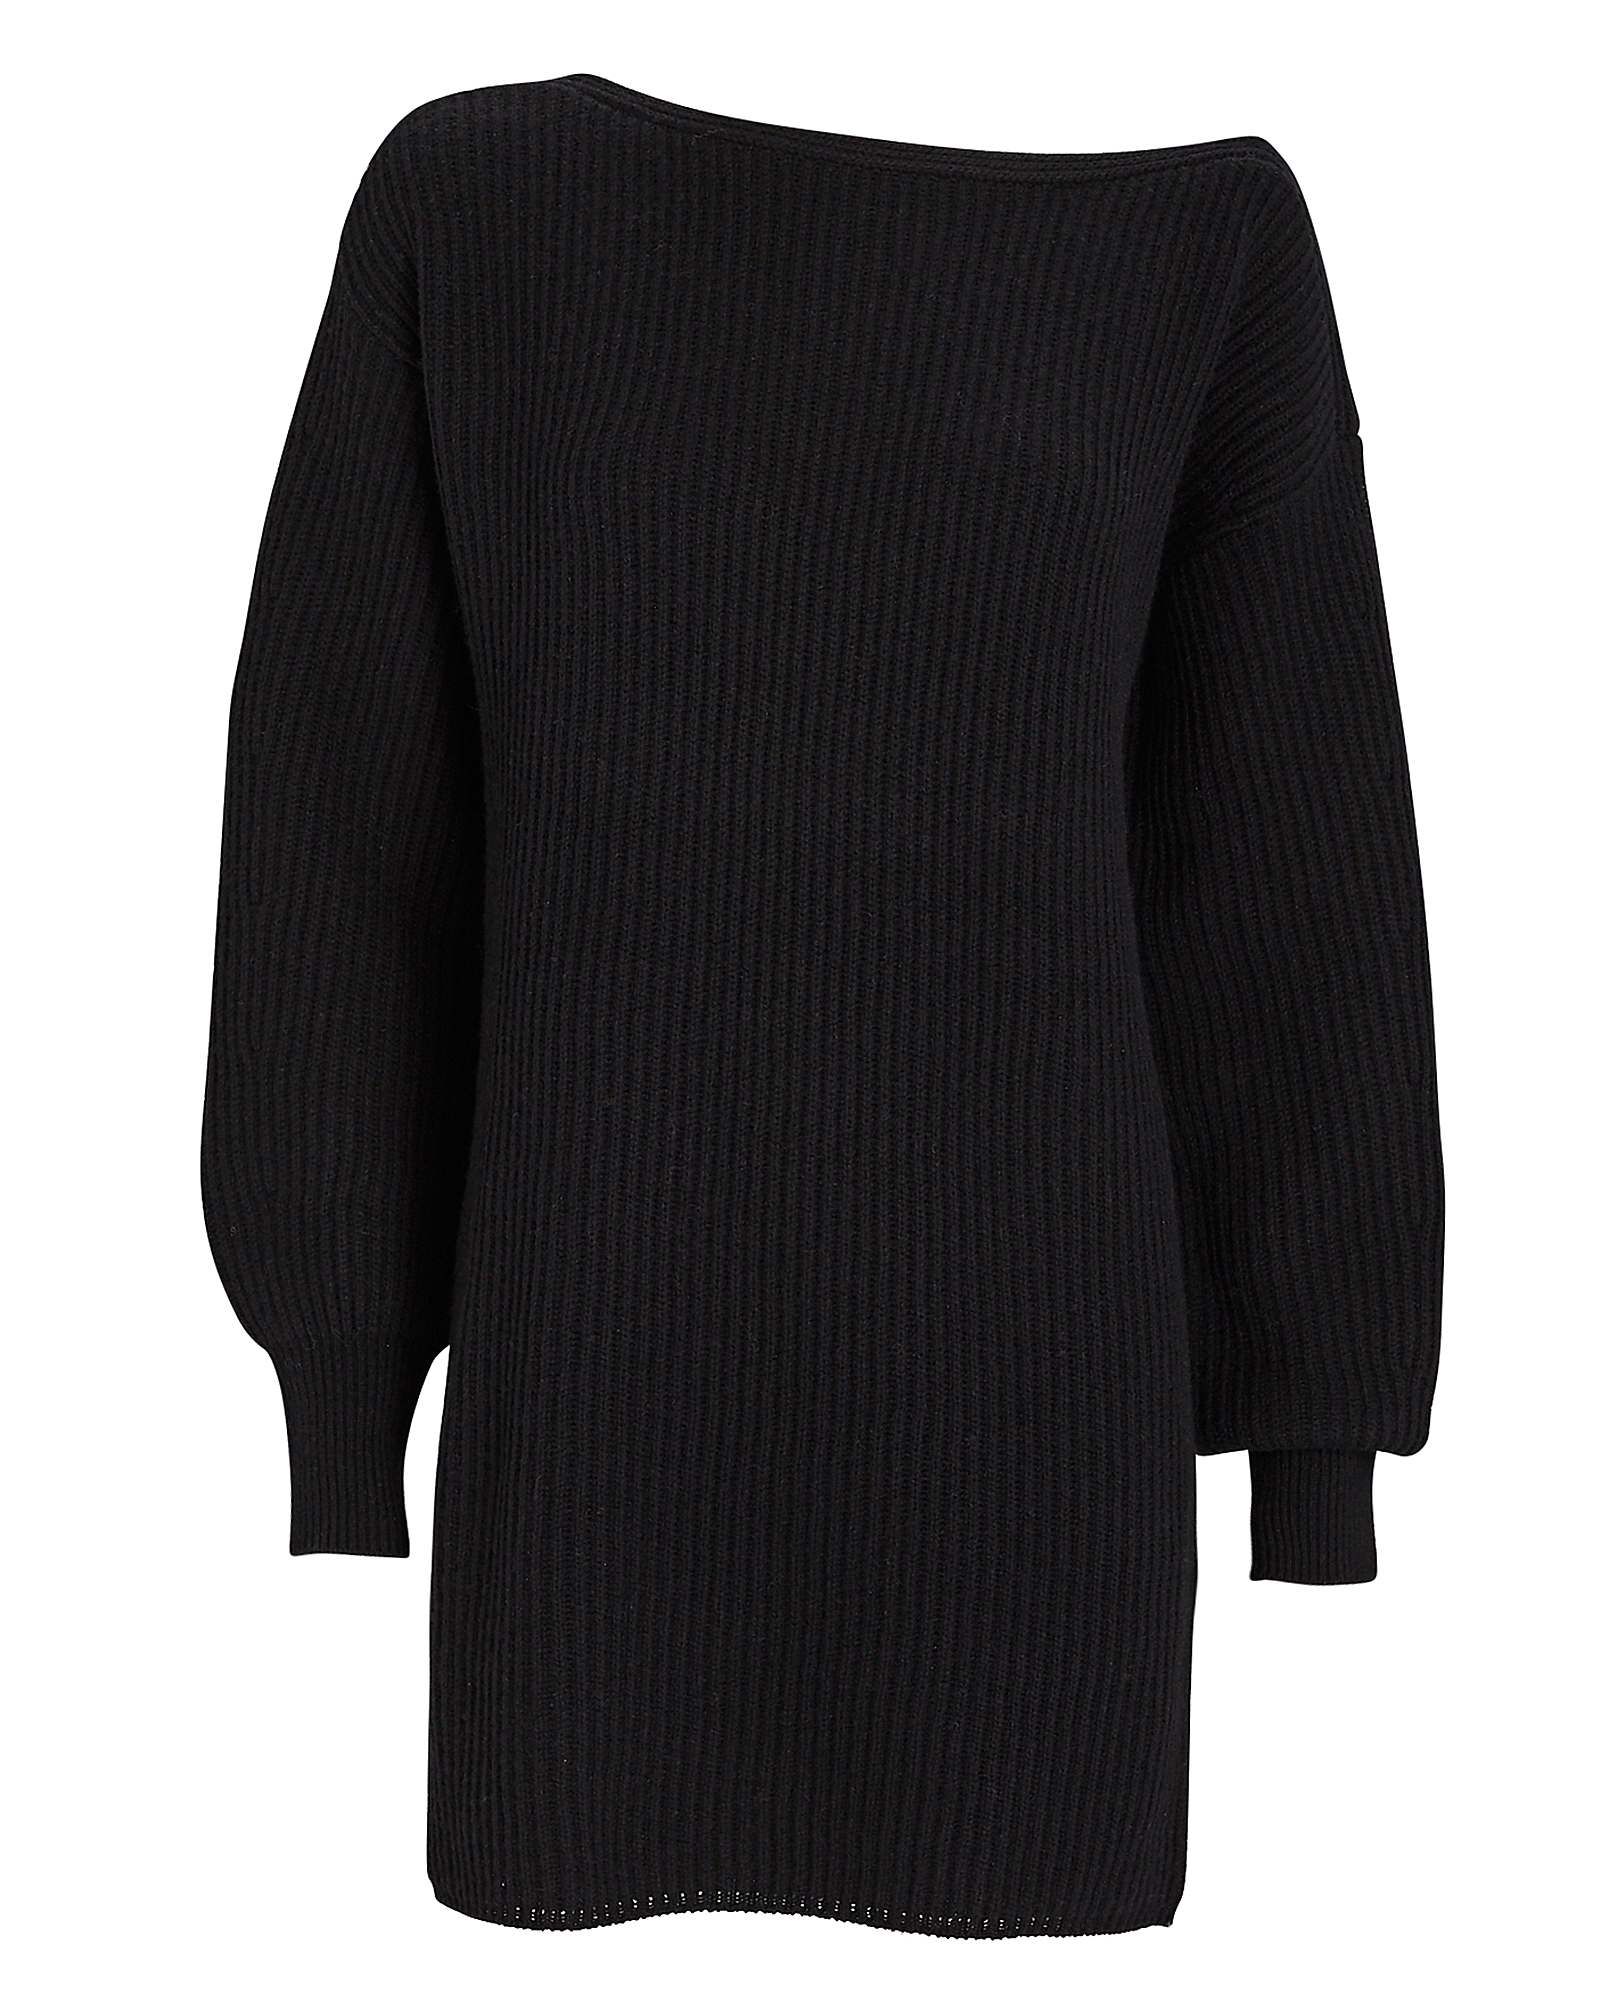 10 of the Best Sweater Dresses to Cozy Up to Right Now | Well+Good